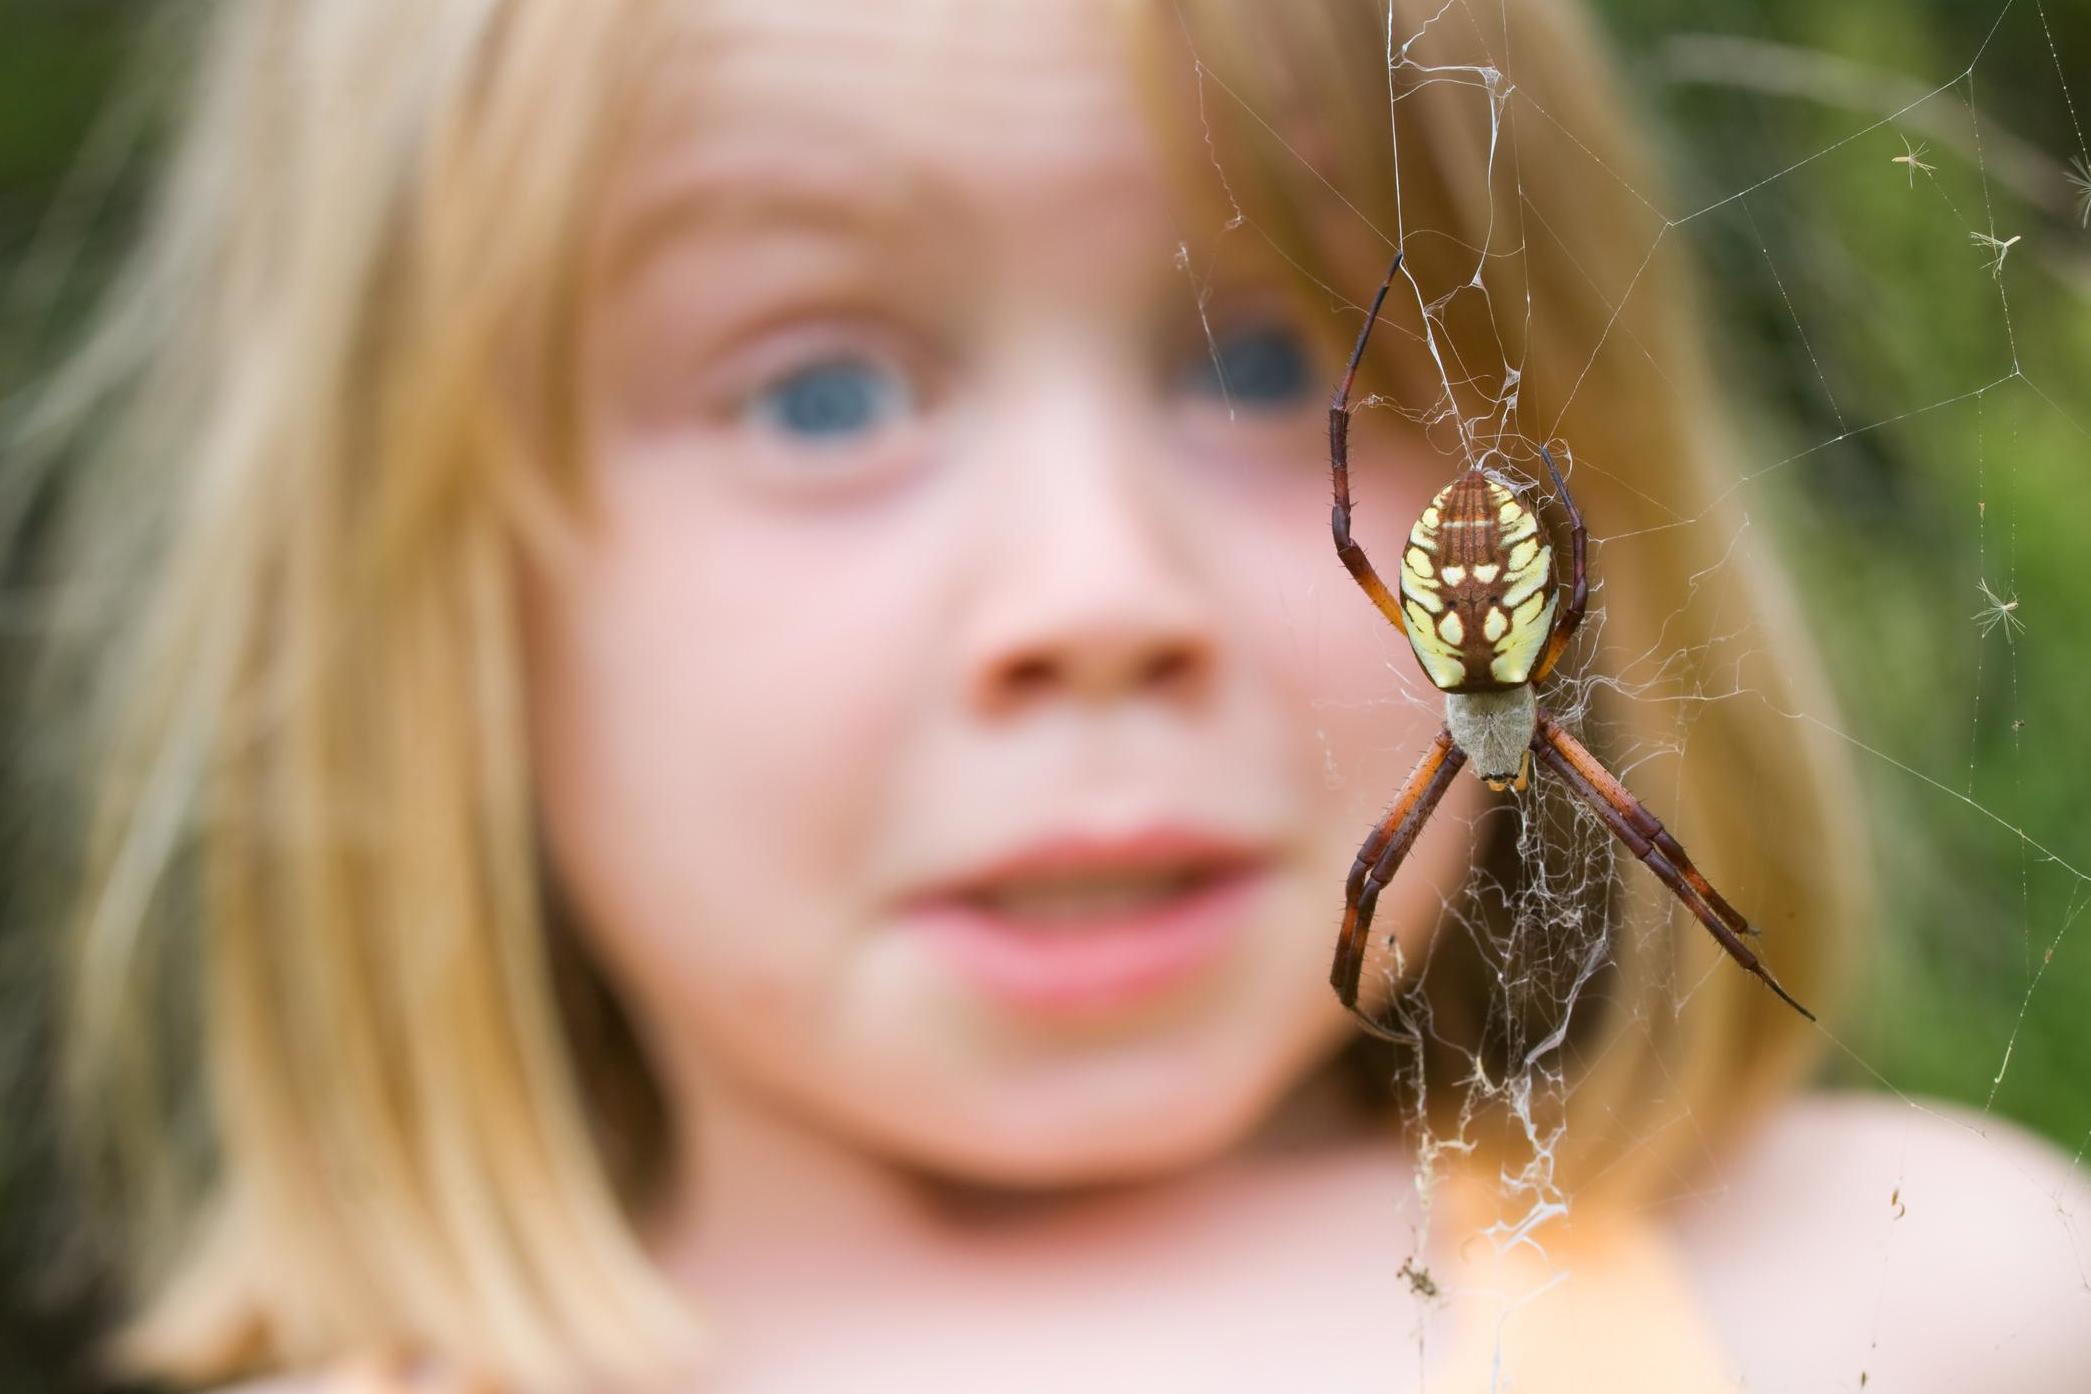 Heartbeats could be key to treating fear of spiders The Independent The Independent picture